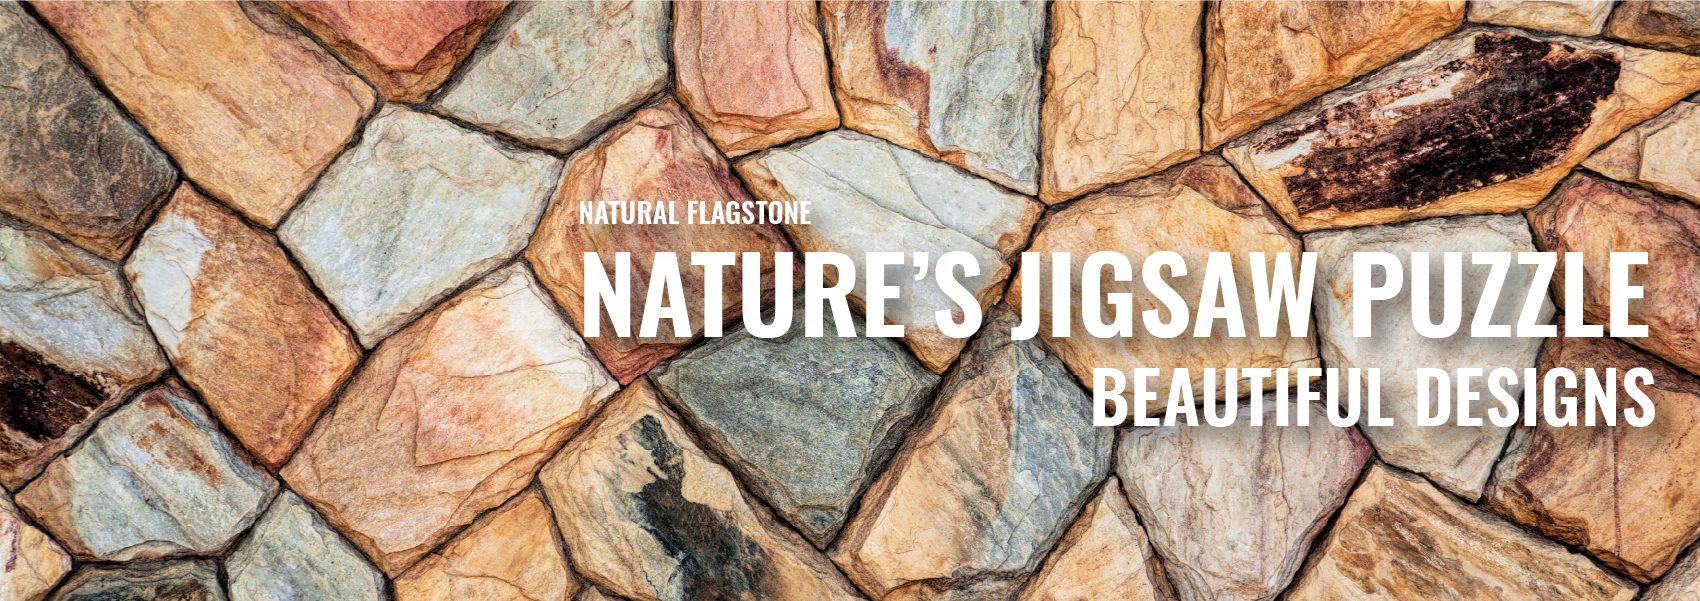 Rockland natural flagstone products banner.